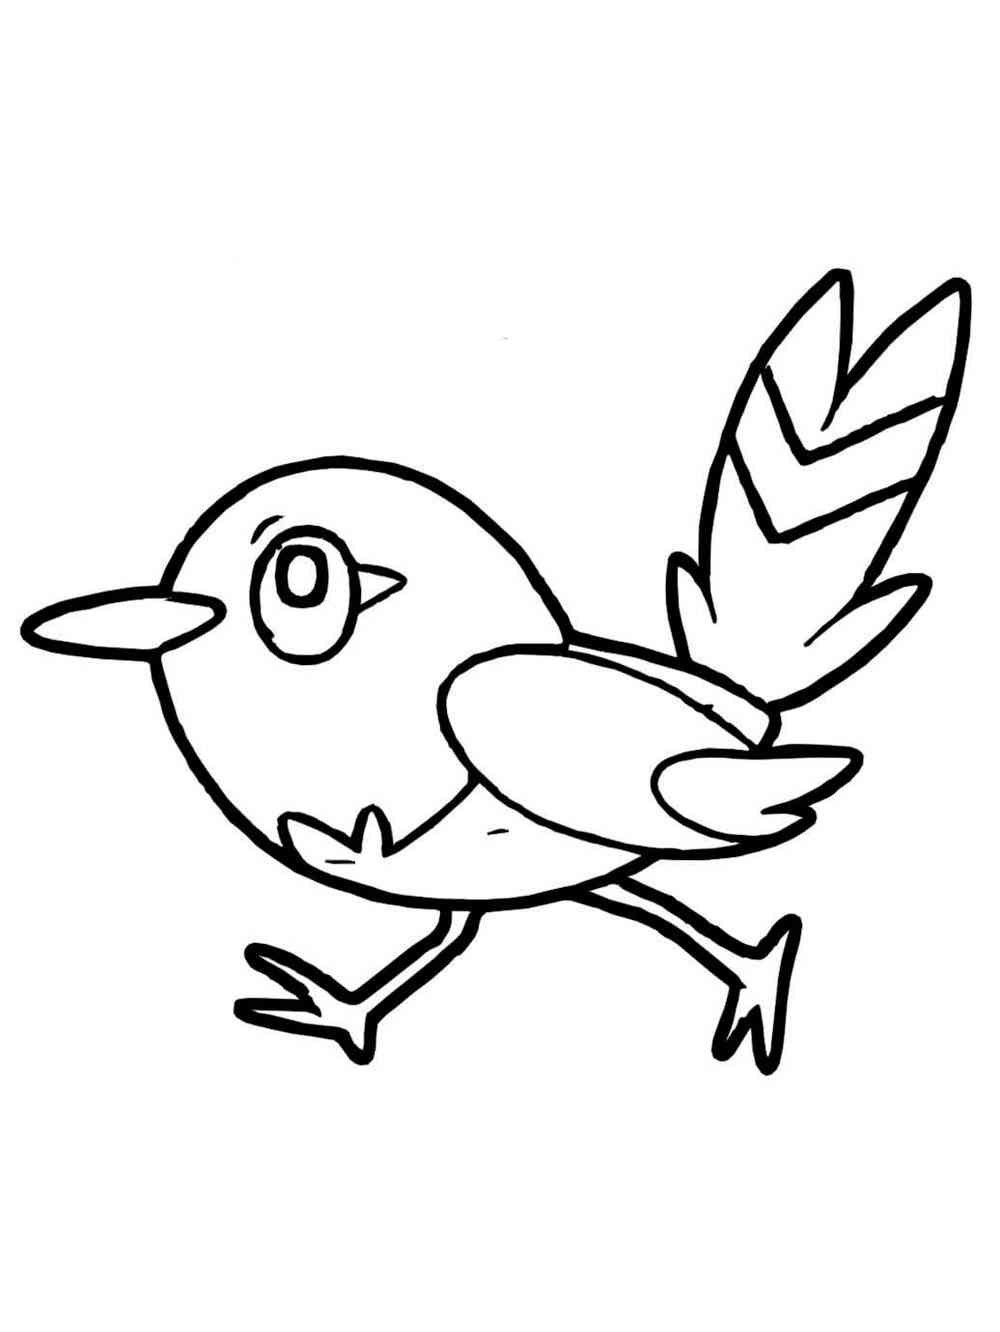 Fletchling Pokemon coloring pages - Free Printable